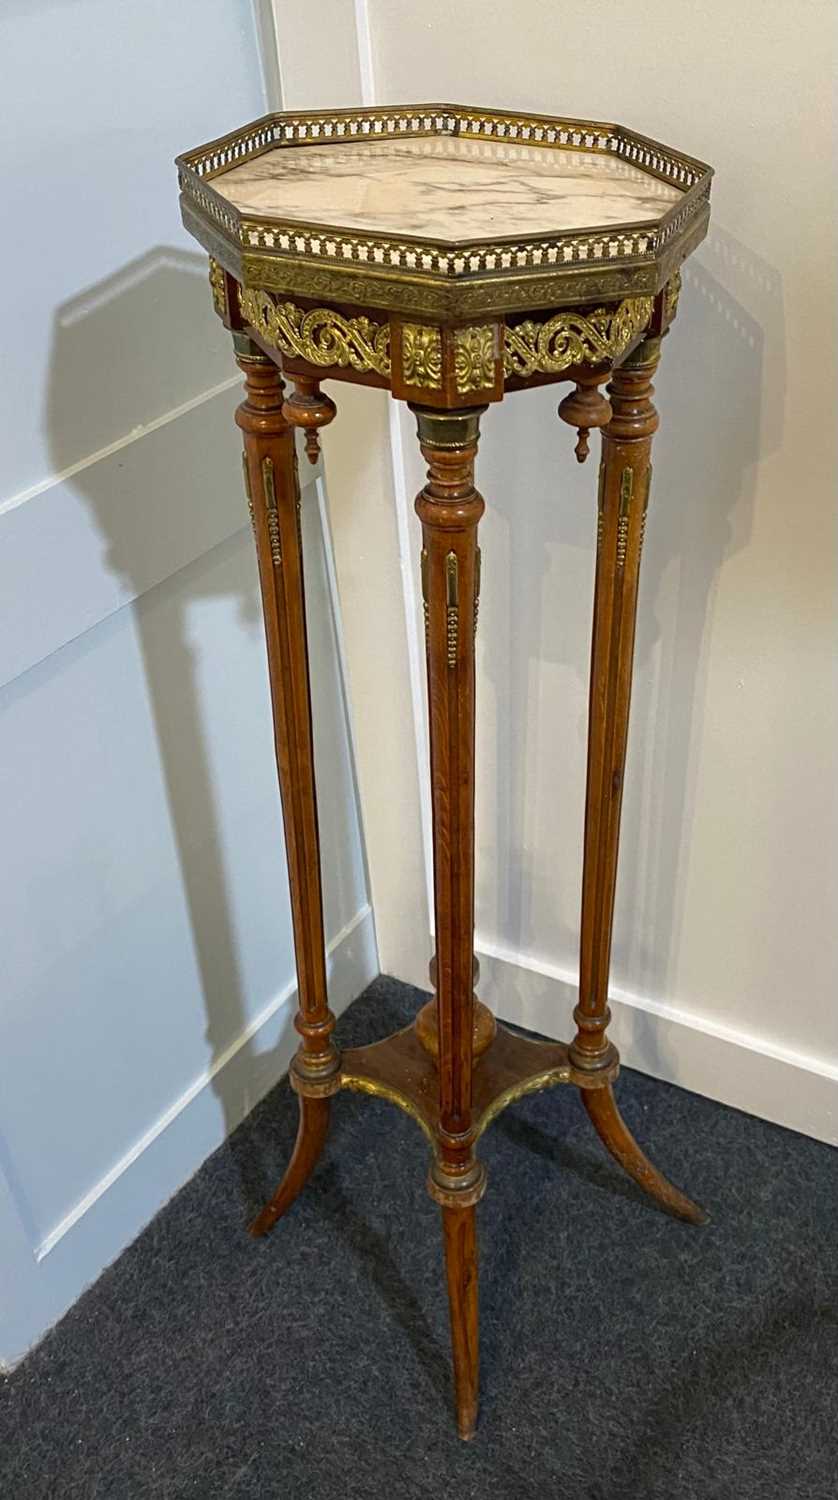 A French gilt metal mounted jardiniere stand, with octagonal marble top on turned and fluted legs